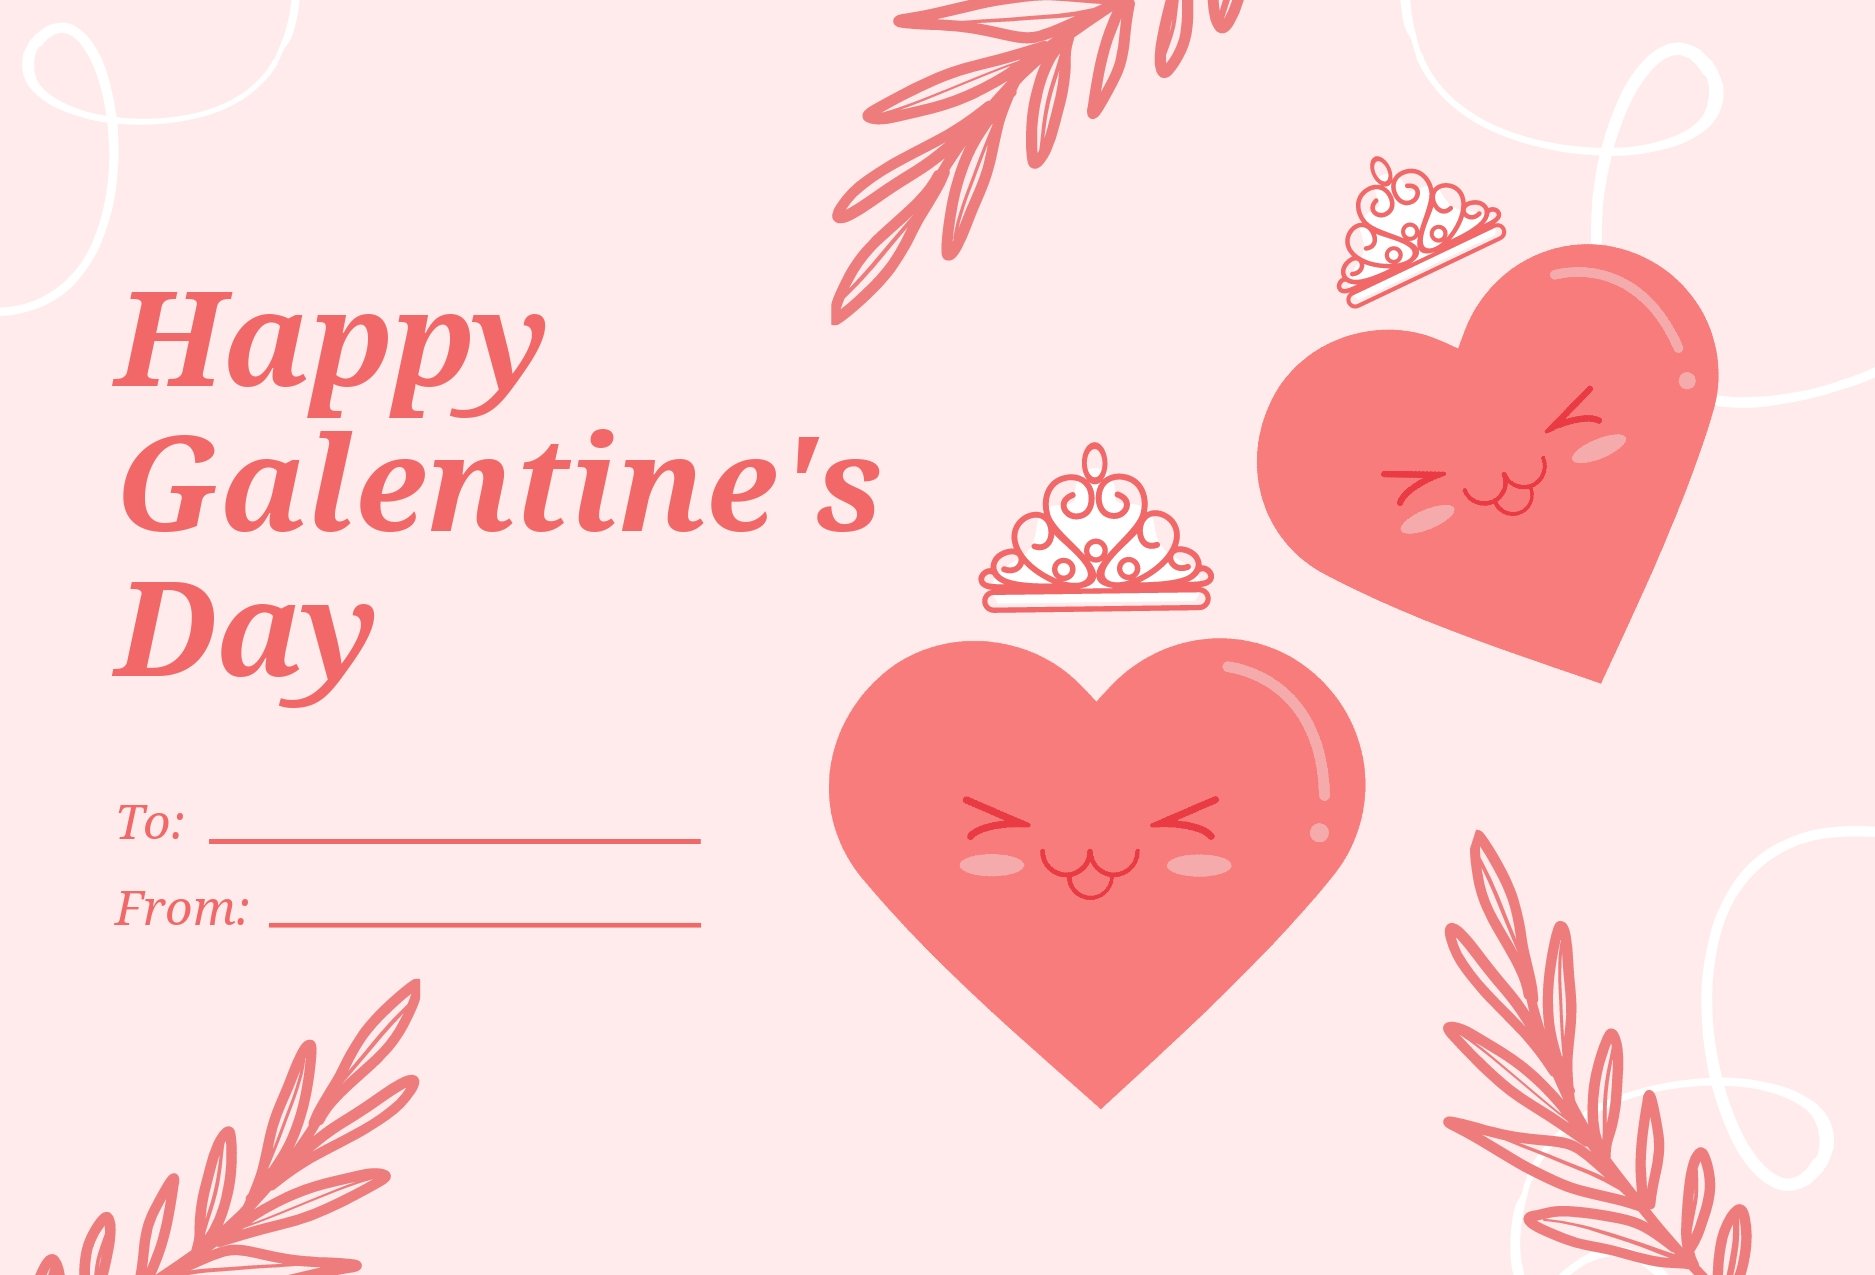 Funny Galentine's Day Card Template